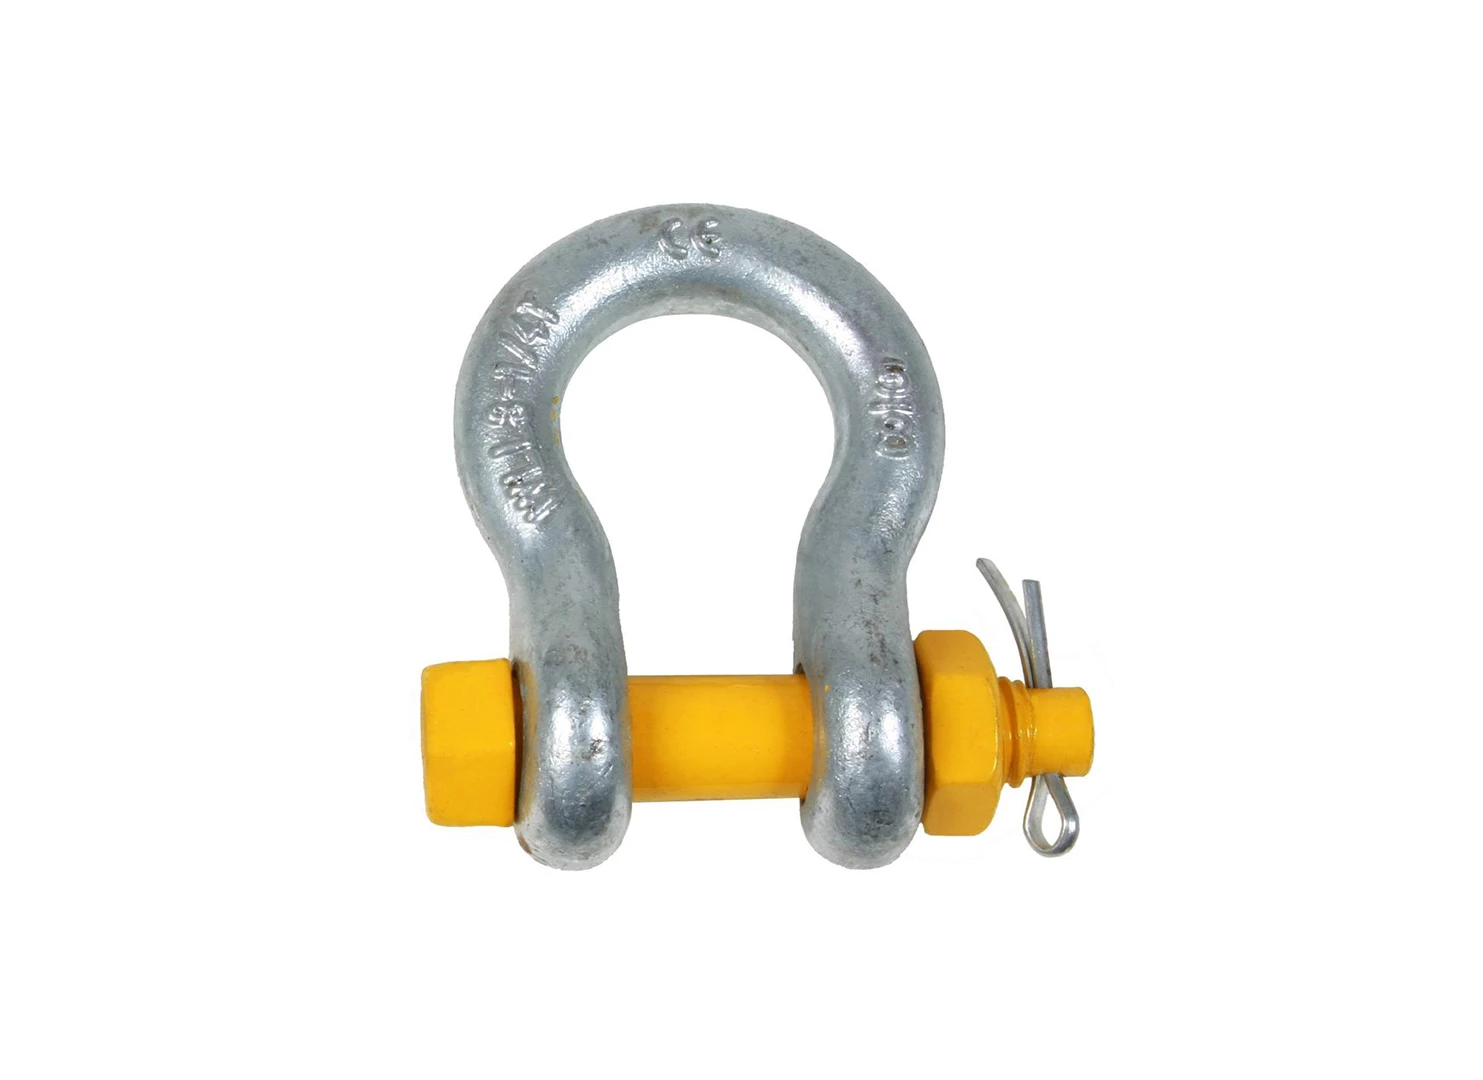 Product: Shackles 25mm, 3.25 t